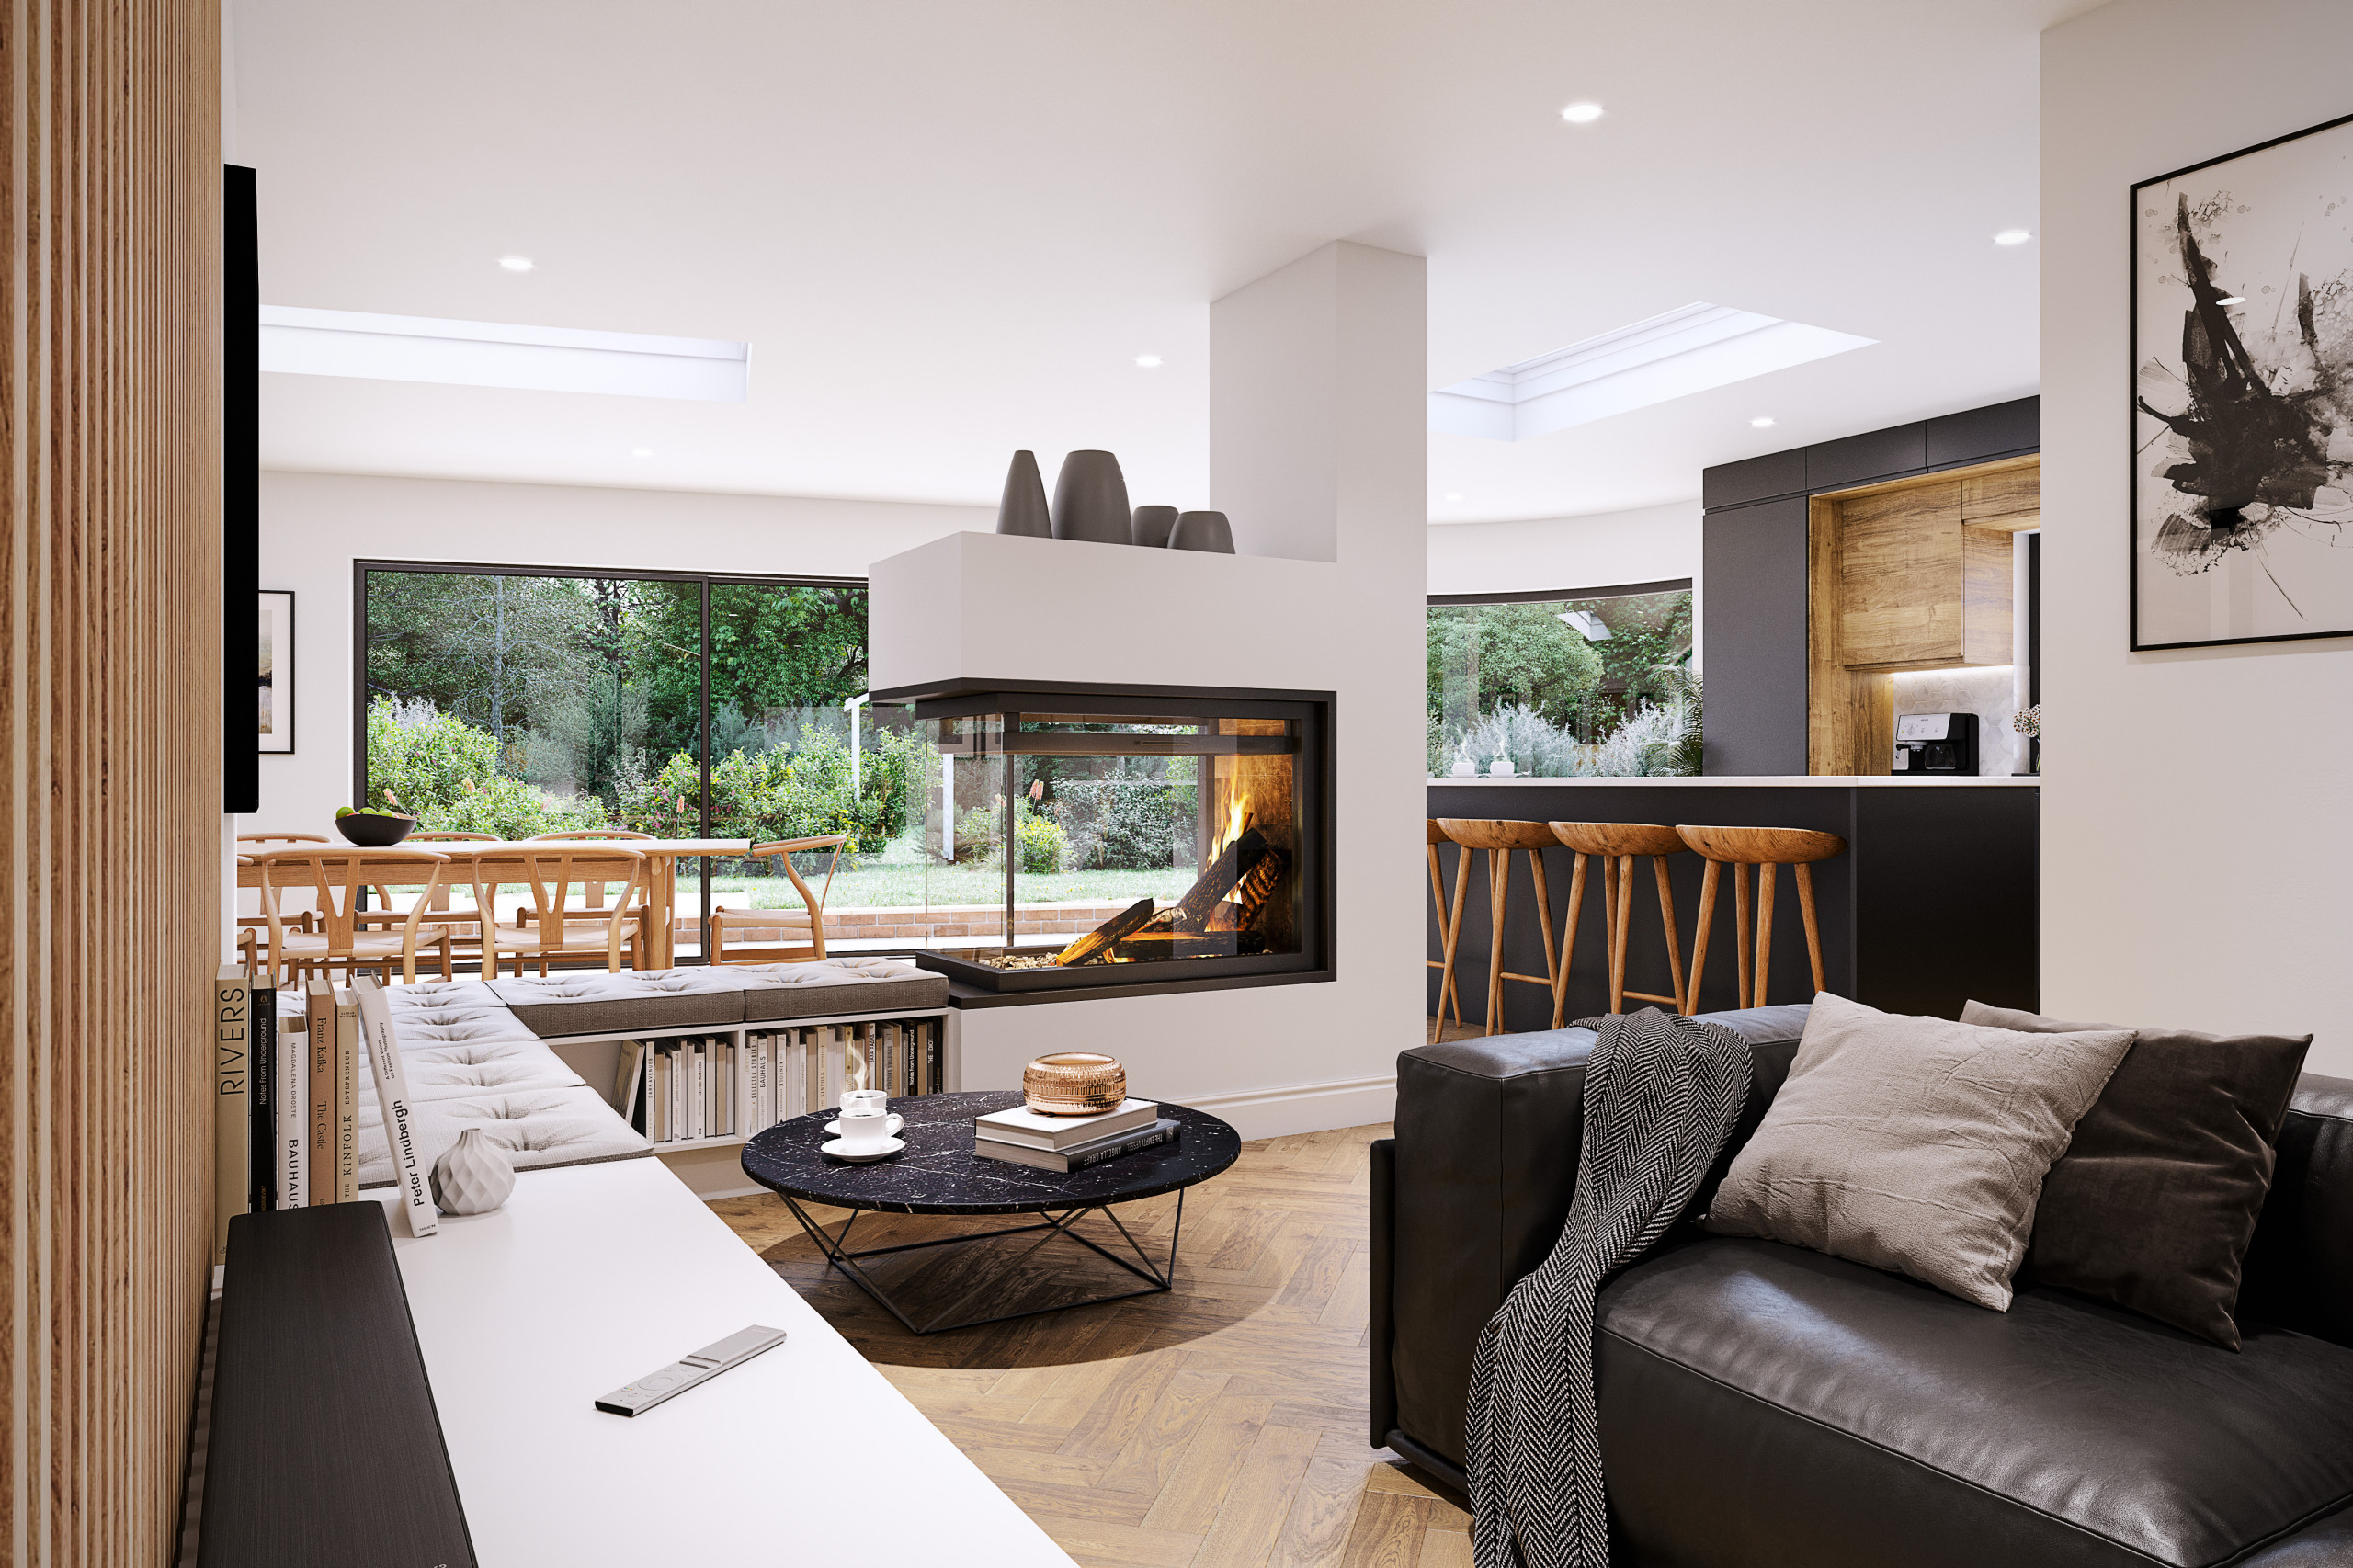 Interior view of living space, Feature fire, Snug, Relaxation space